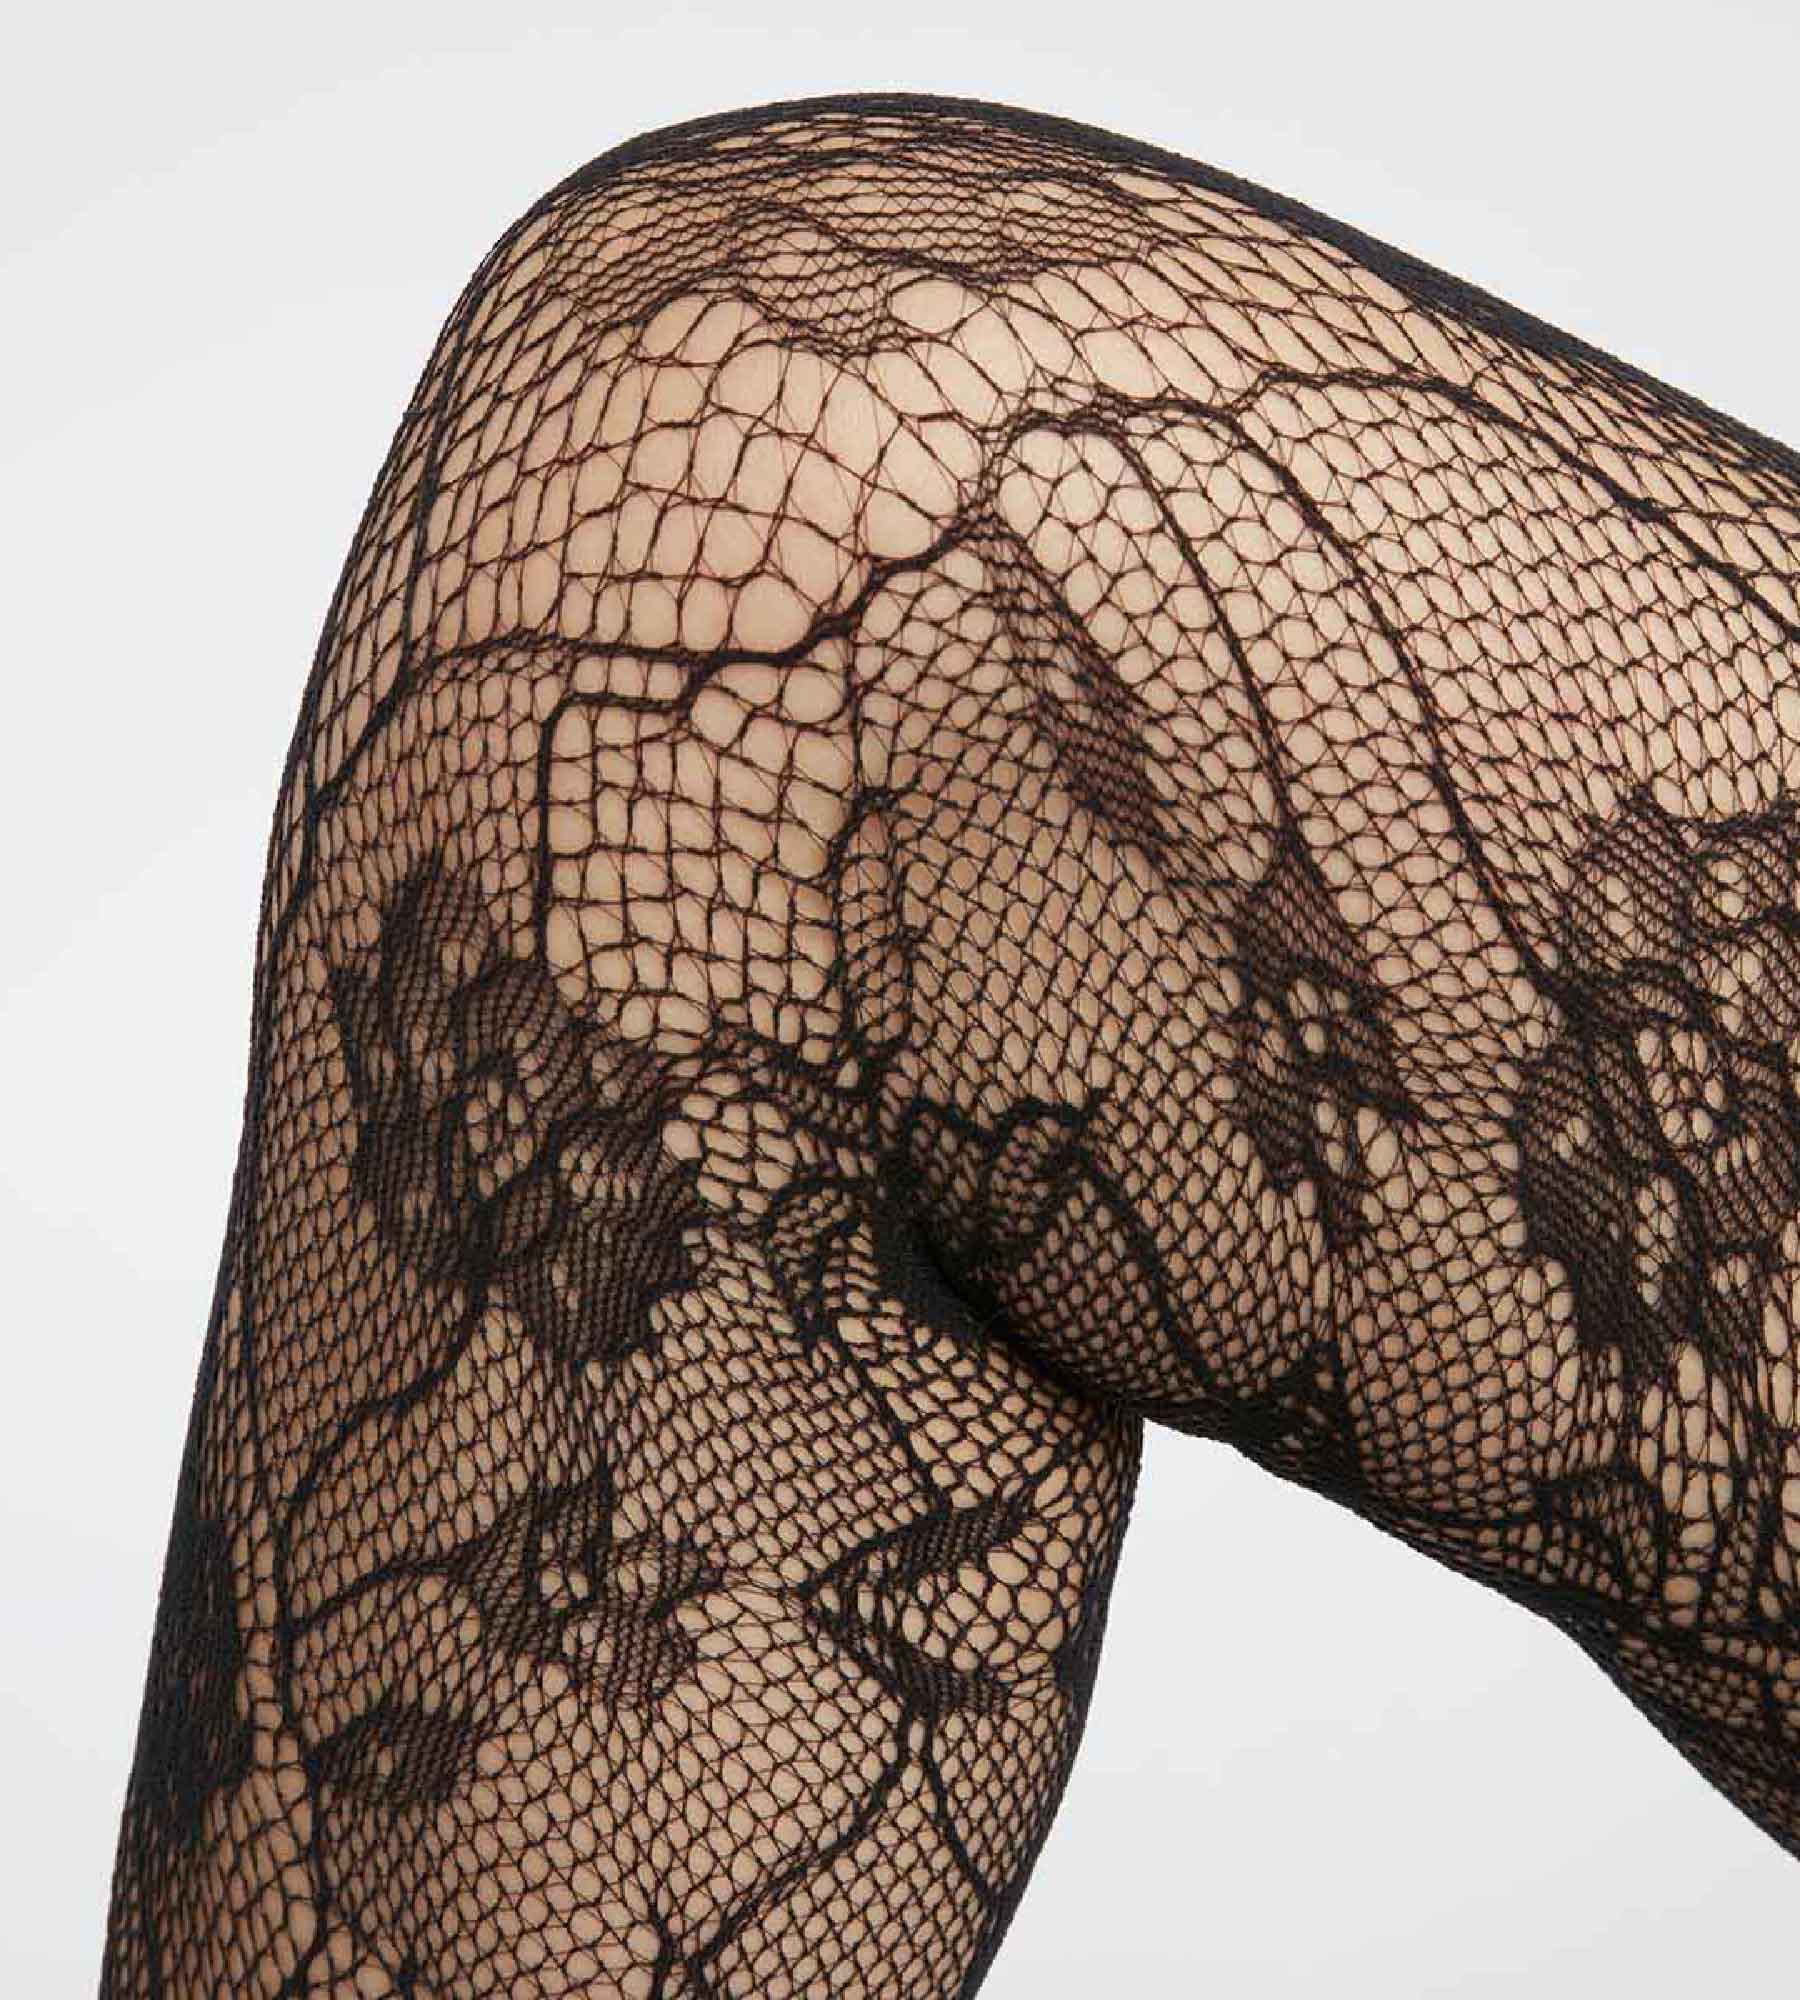 OPAQUE LACE TIGHTS IN BLACK